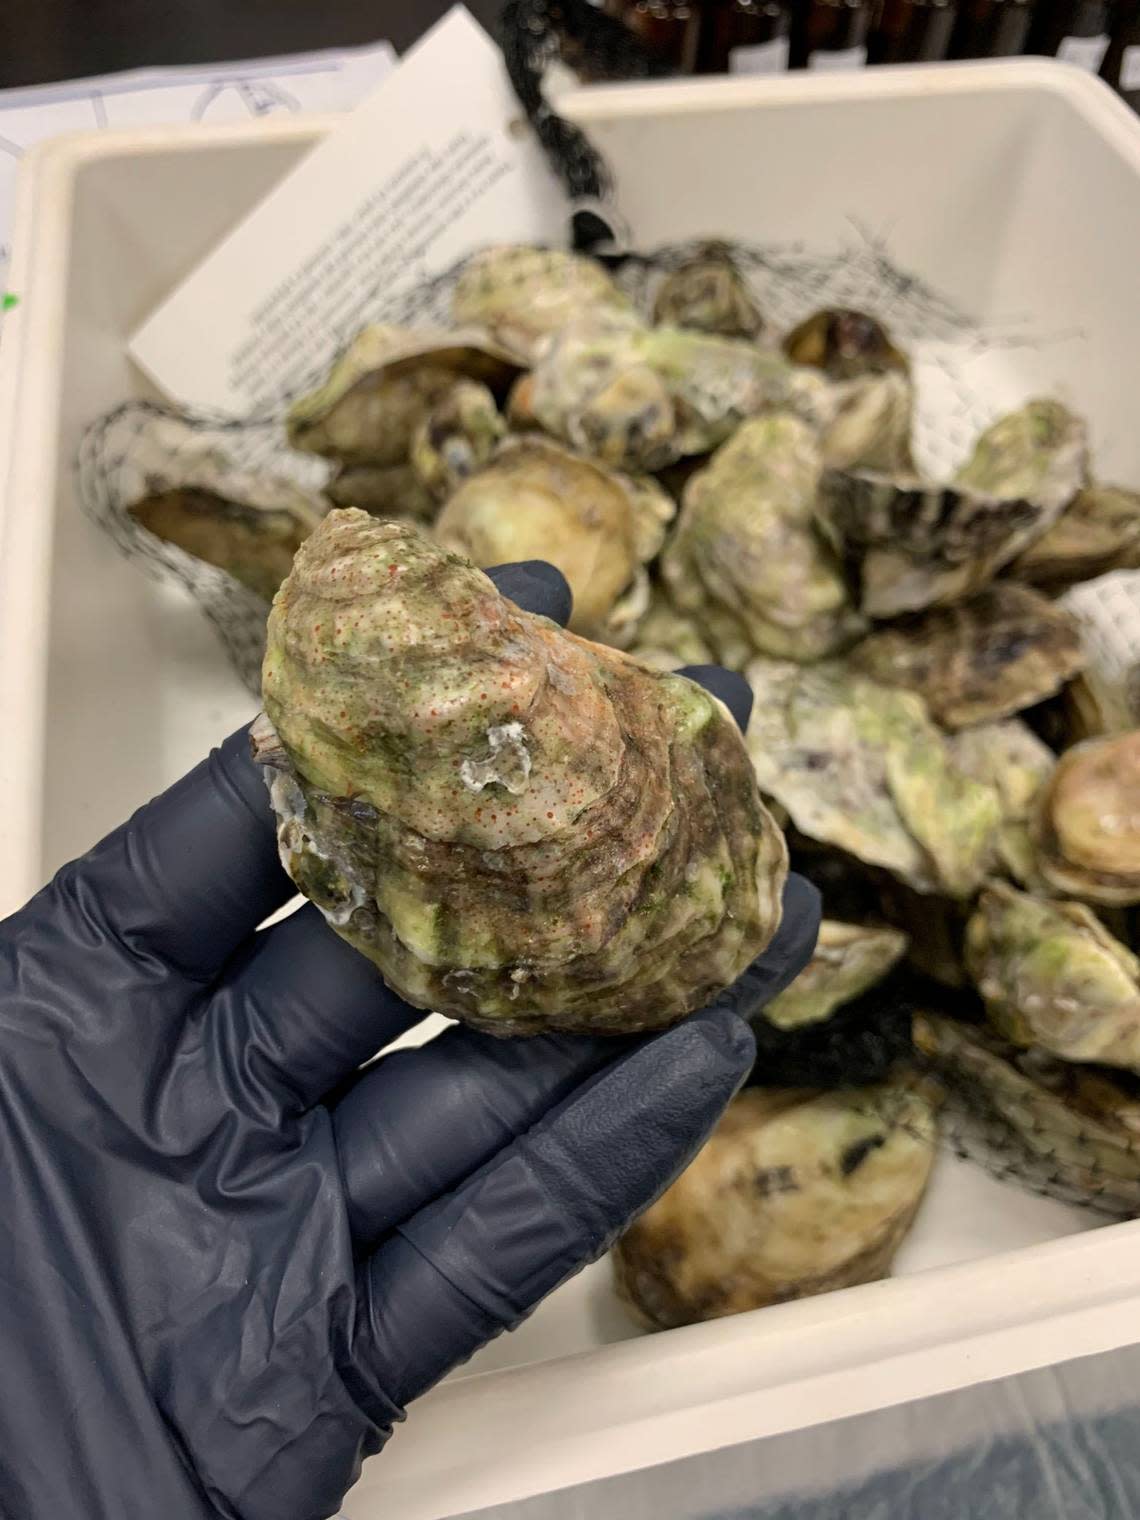 Researchers at FIU tested Florida oysters for levels of toxic PFAS chemicals. The ones from Biscayne Bay were, by far, the most contaminated.